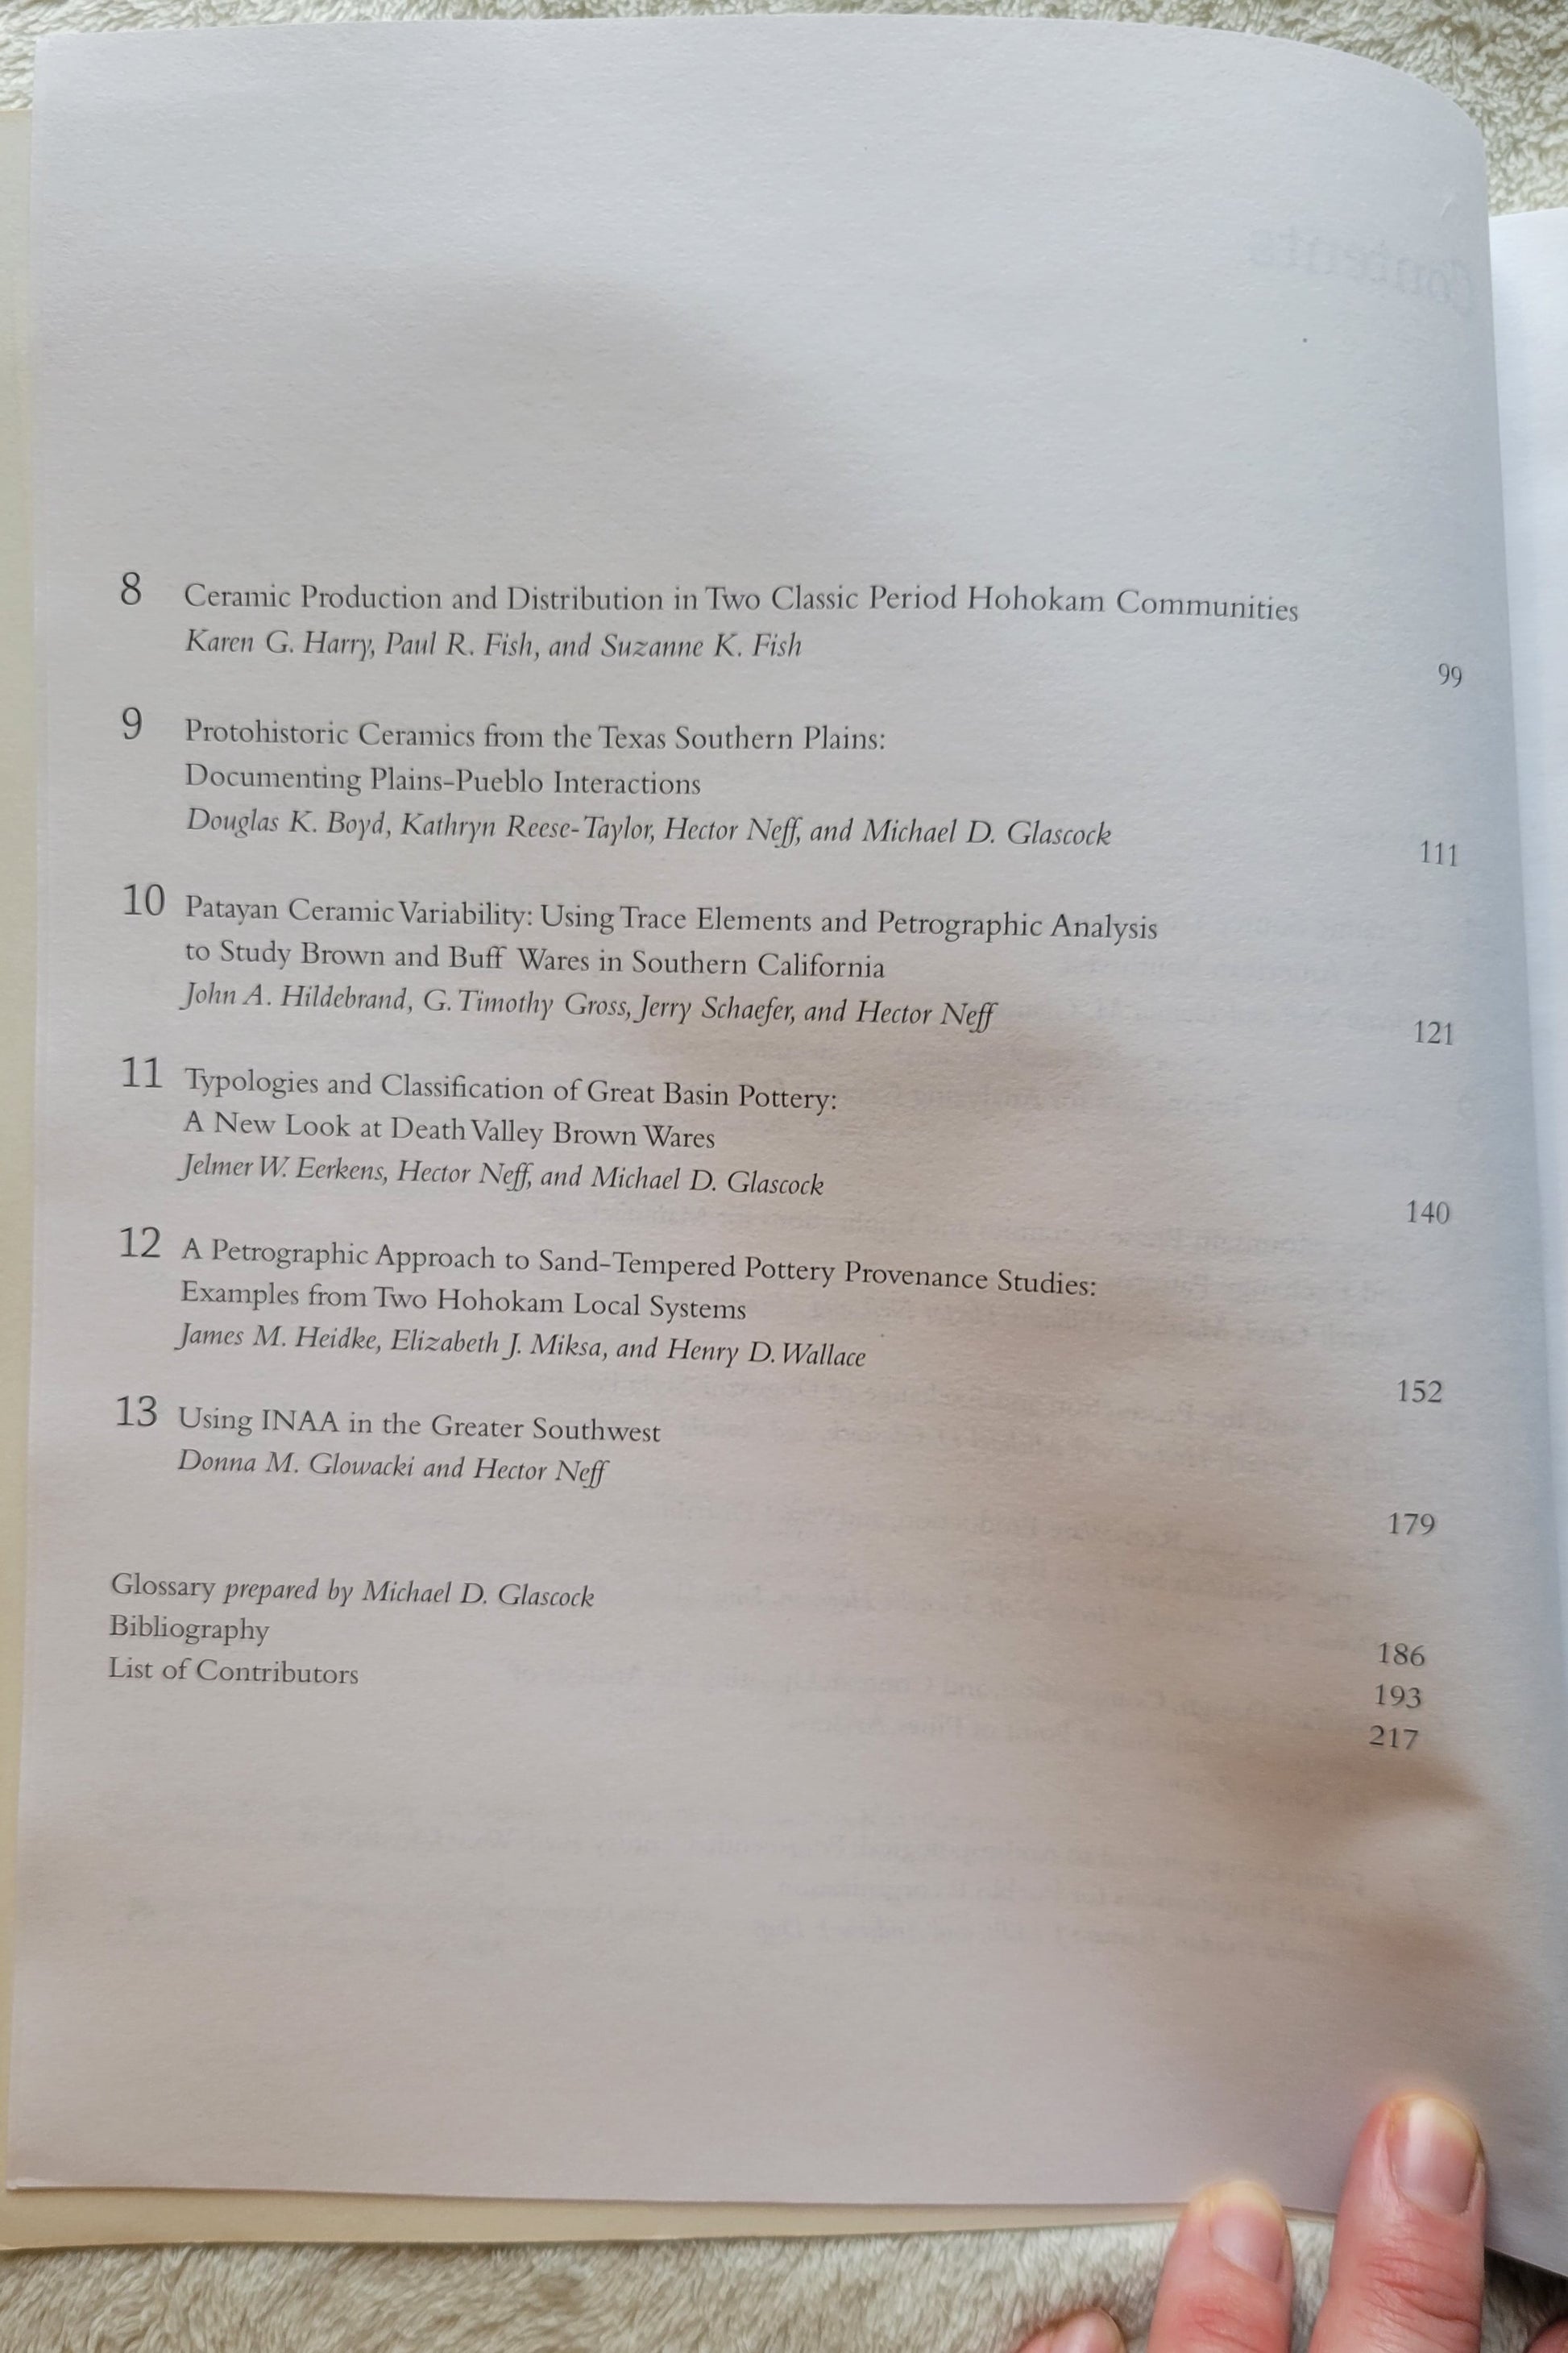 Used book.  "Ceramic Production and Circulation in the Greater Southwest: Source Determination by INAA and Complementary Mineralogical Investigations" edited by Dr. Donna M. Glowacki and Dr.Hector Neff, published by the Cotsen Institute of Archaeology at UCLA, 2002.  View of table of contents.